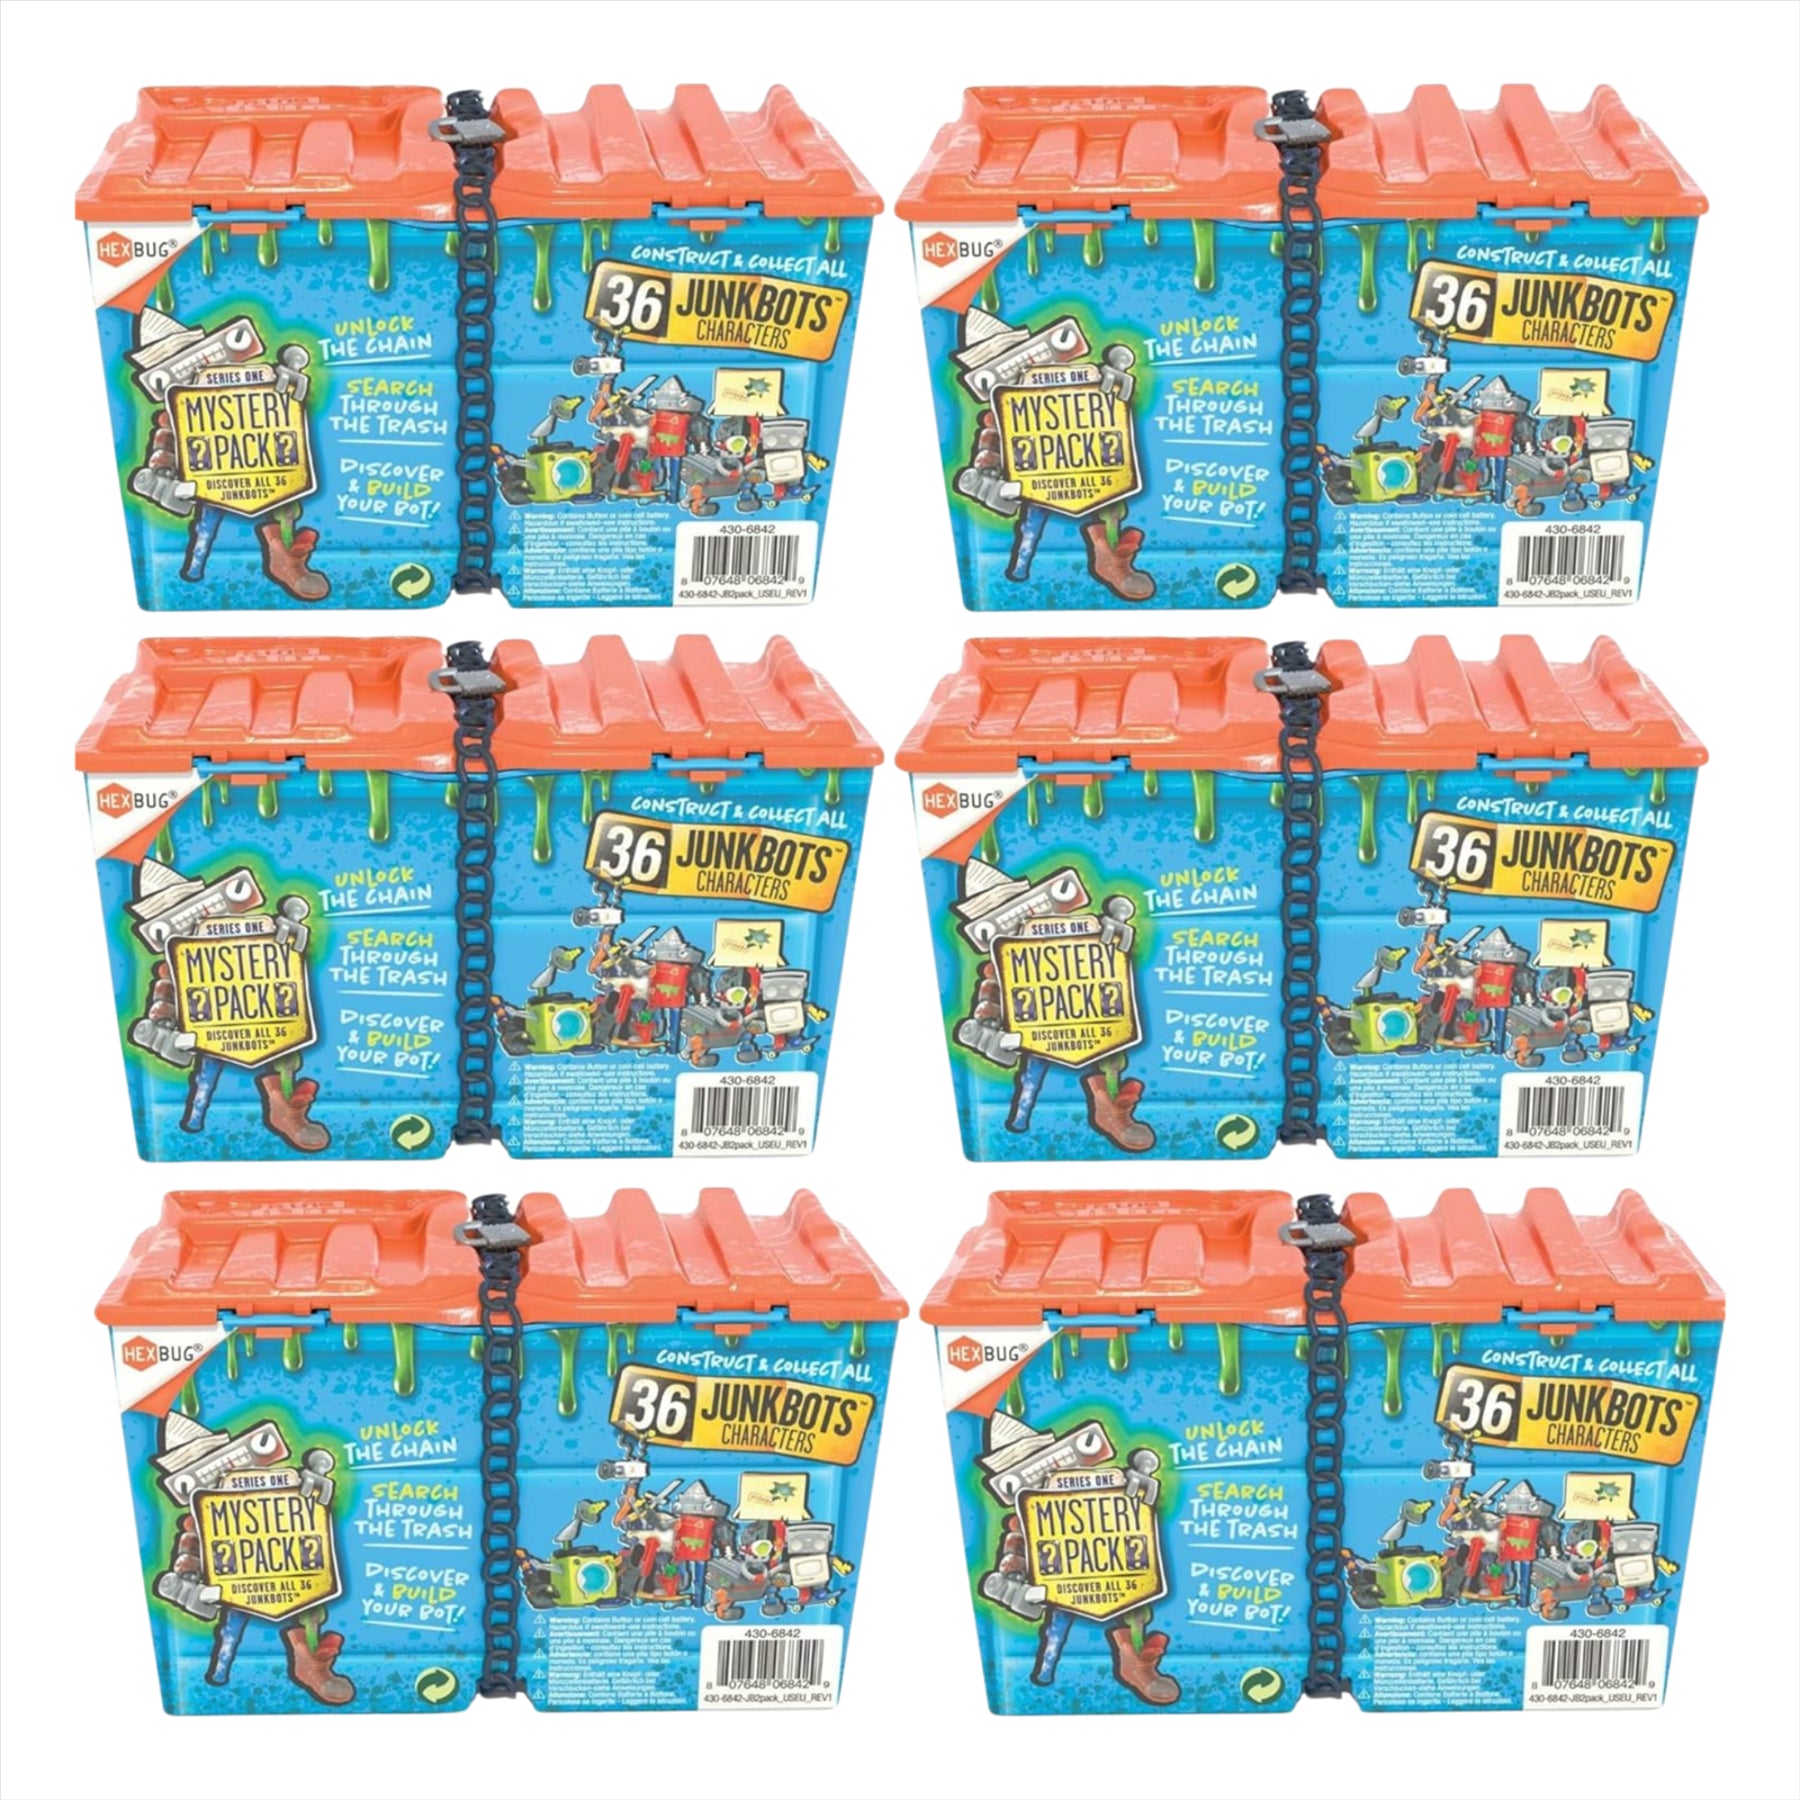 Hexbug Junkbots - Dumpster With 2 Unique Characters to Assemble in Each Box - Pack of 6 - Toptoys2u